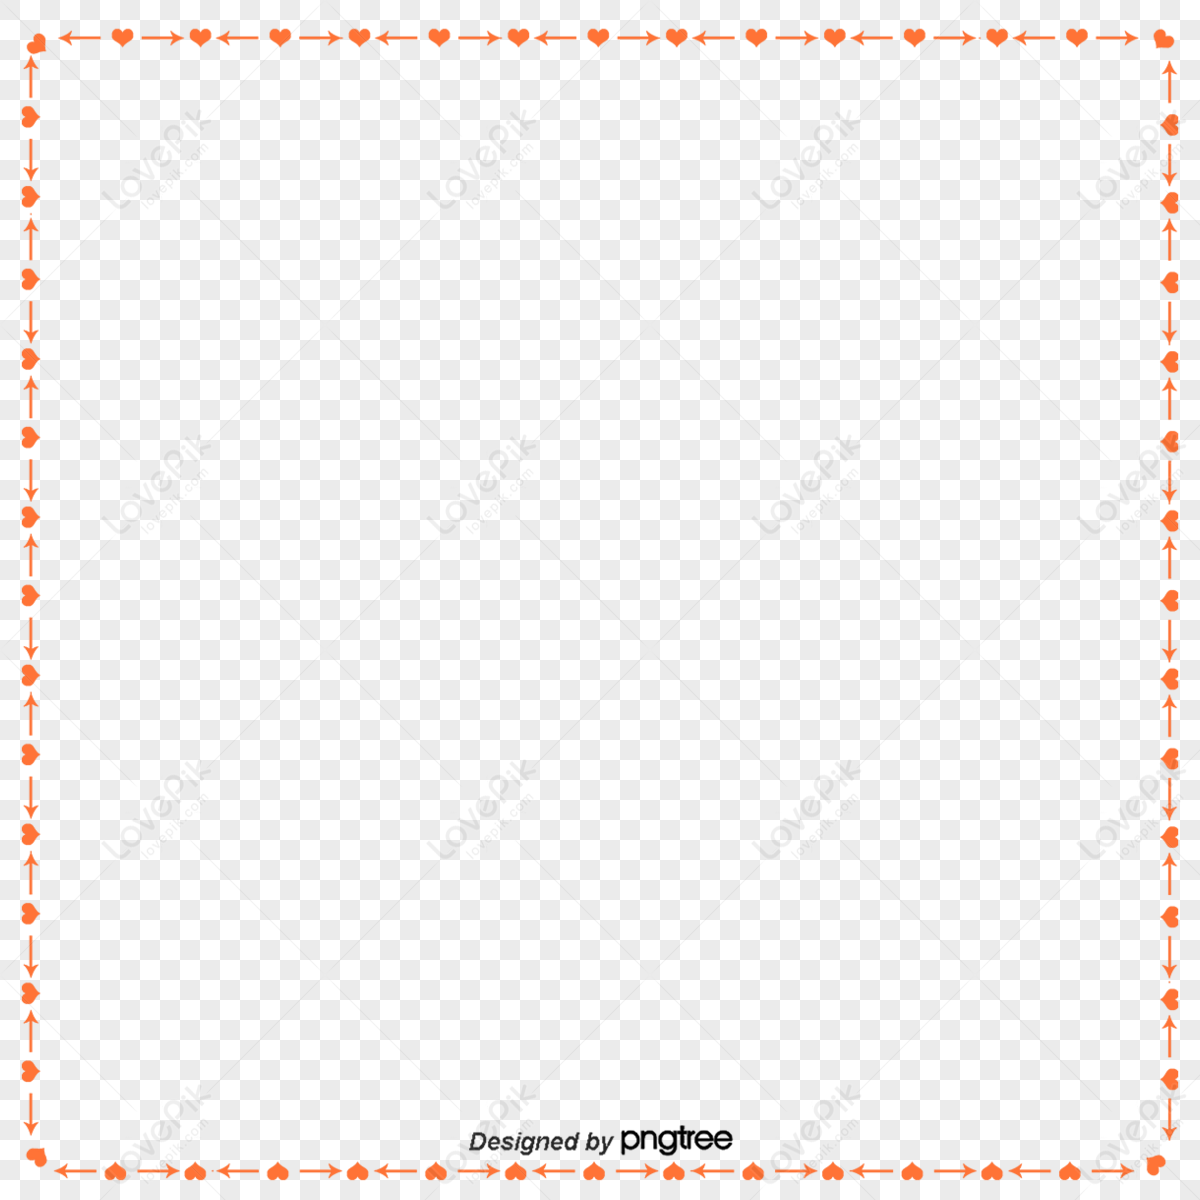 Wave Point Border PNG Images With Transparent Background | Free ...